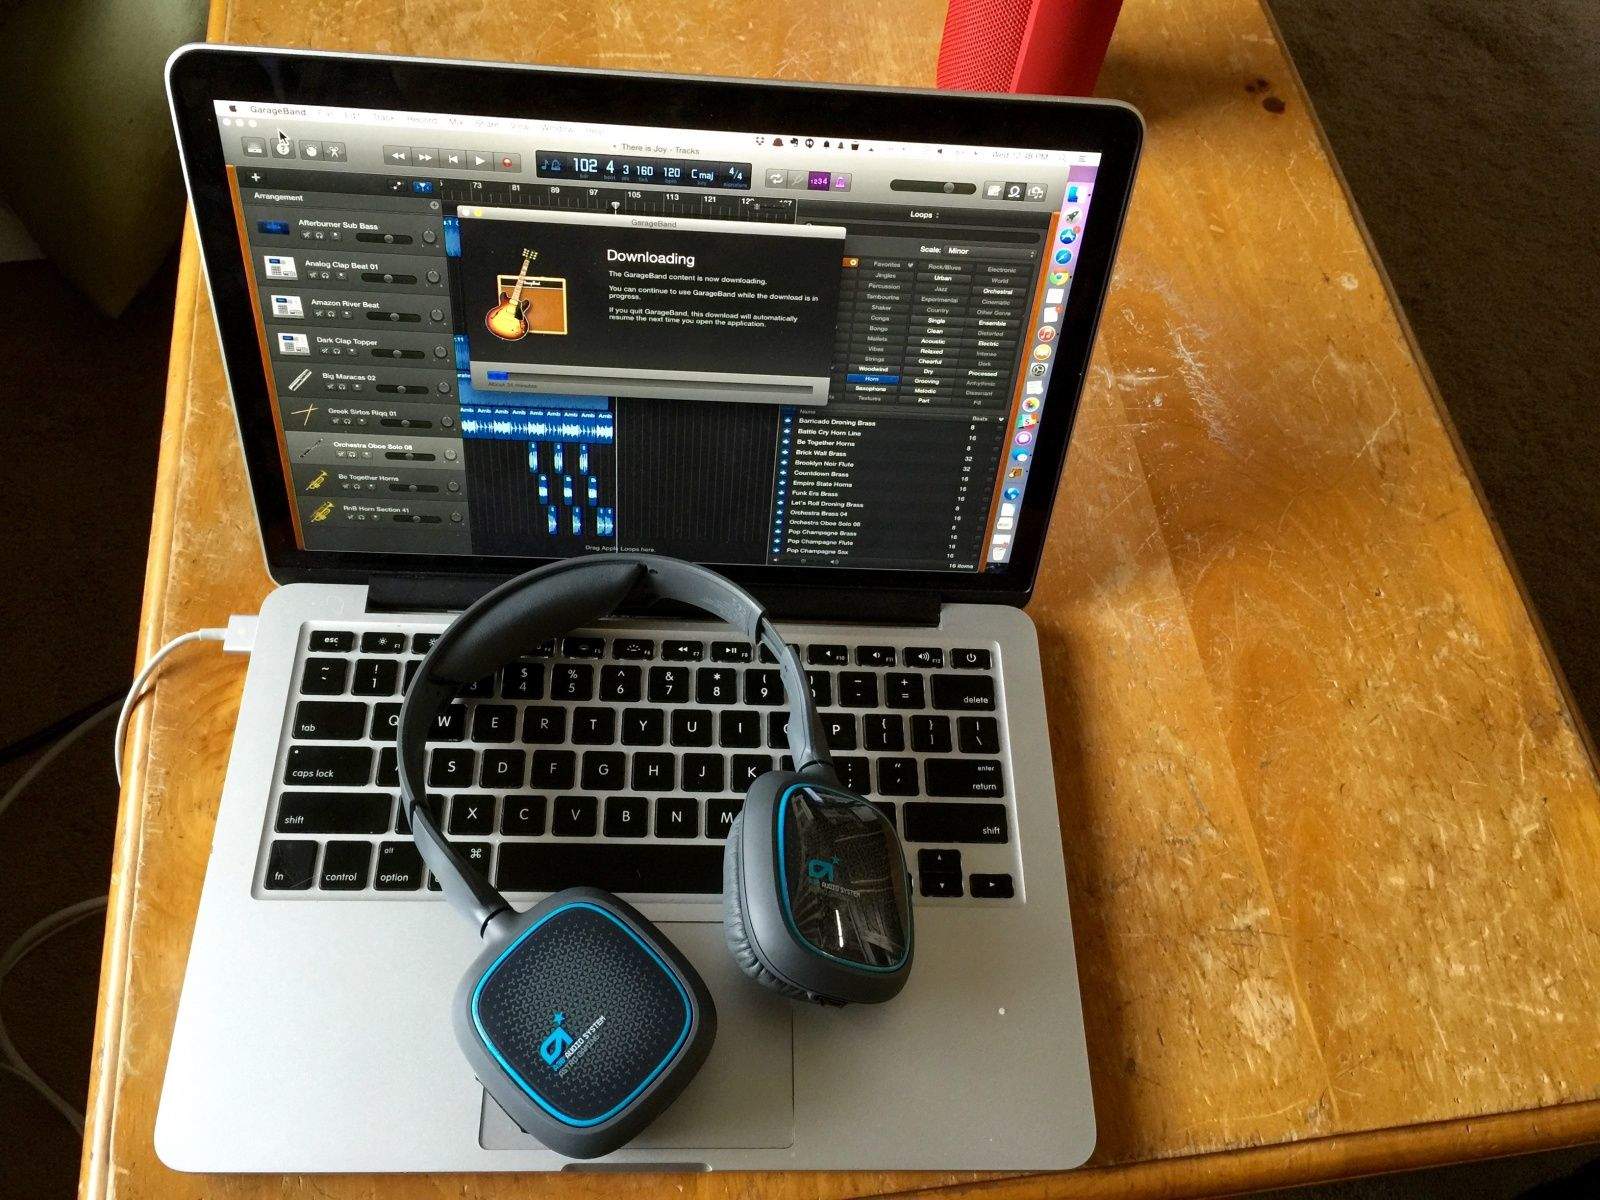 All you need to make some sick beats. Photo: Rob LeFebvre/Cult of Mac